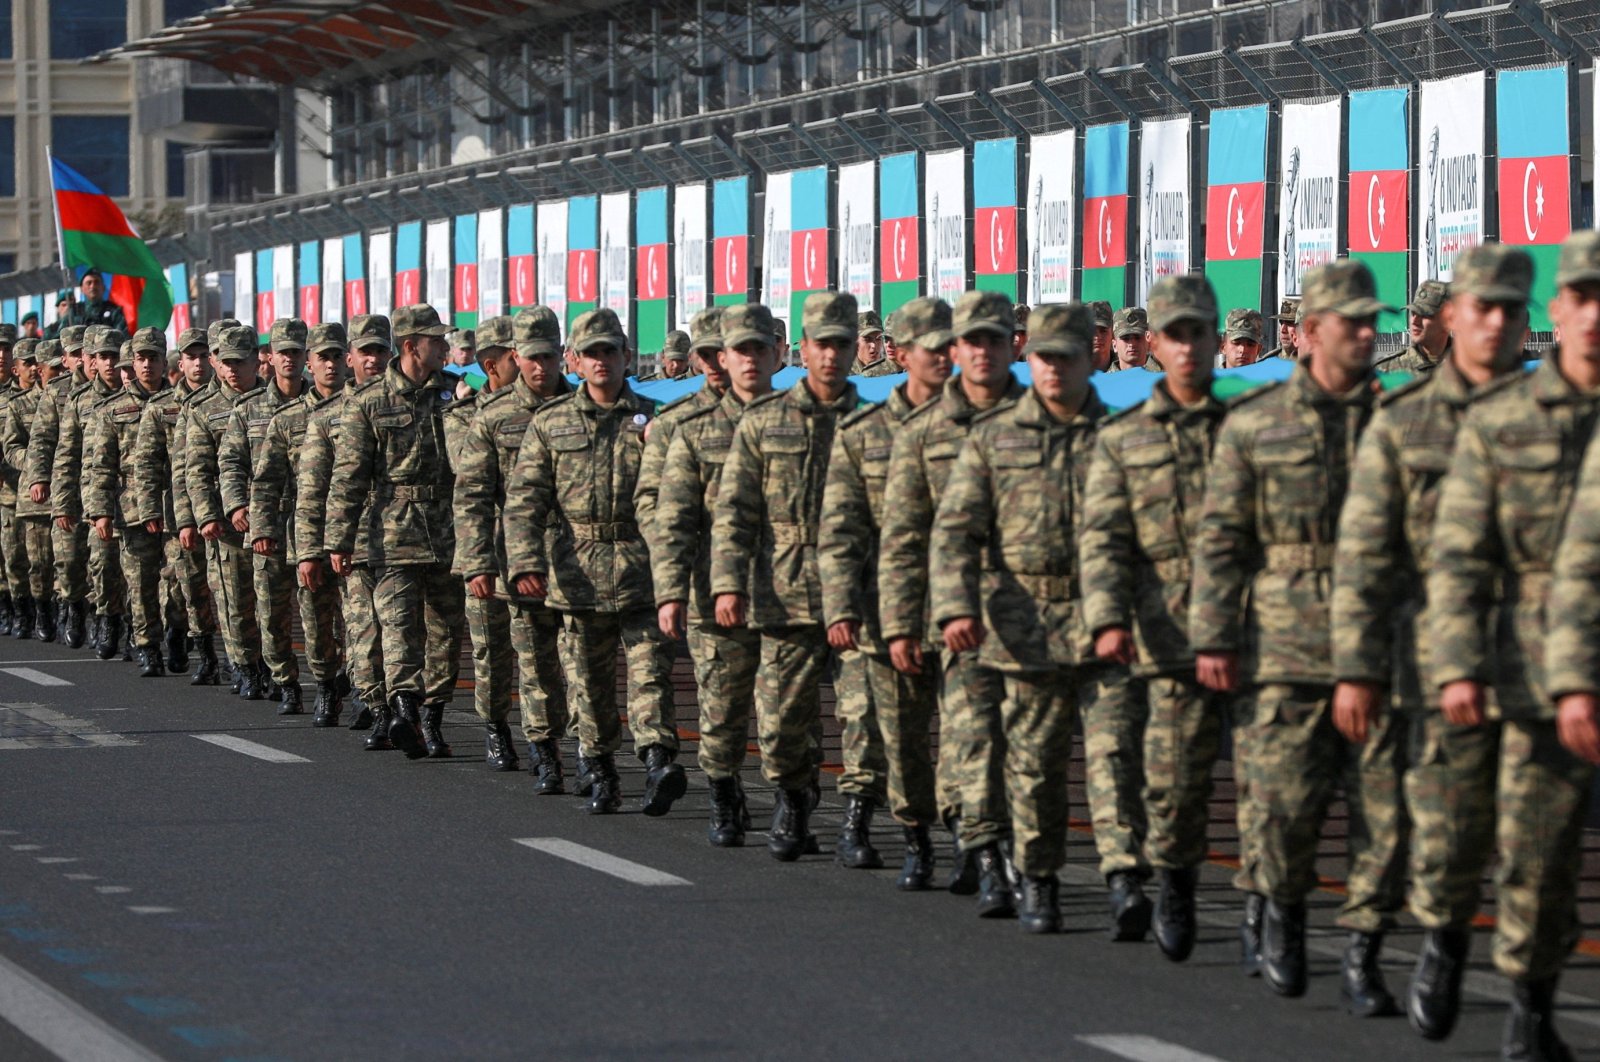 Azerbaijani service members take part in a procession marking the anniversary of the end of the 2020 military conflict over the Nagorno-Karabakh region, in Baku, Azerbaijan, Nov. 8, 2021. (Reuters Photo)